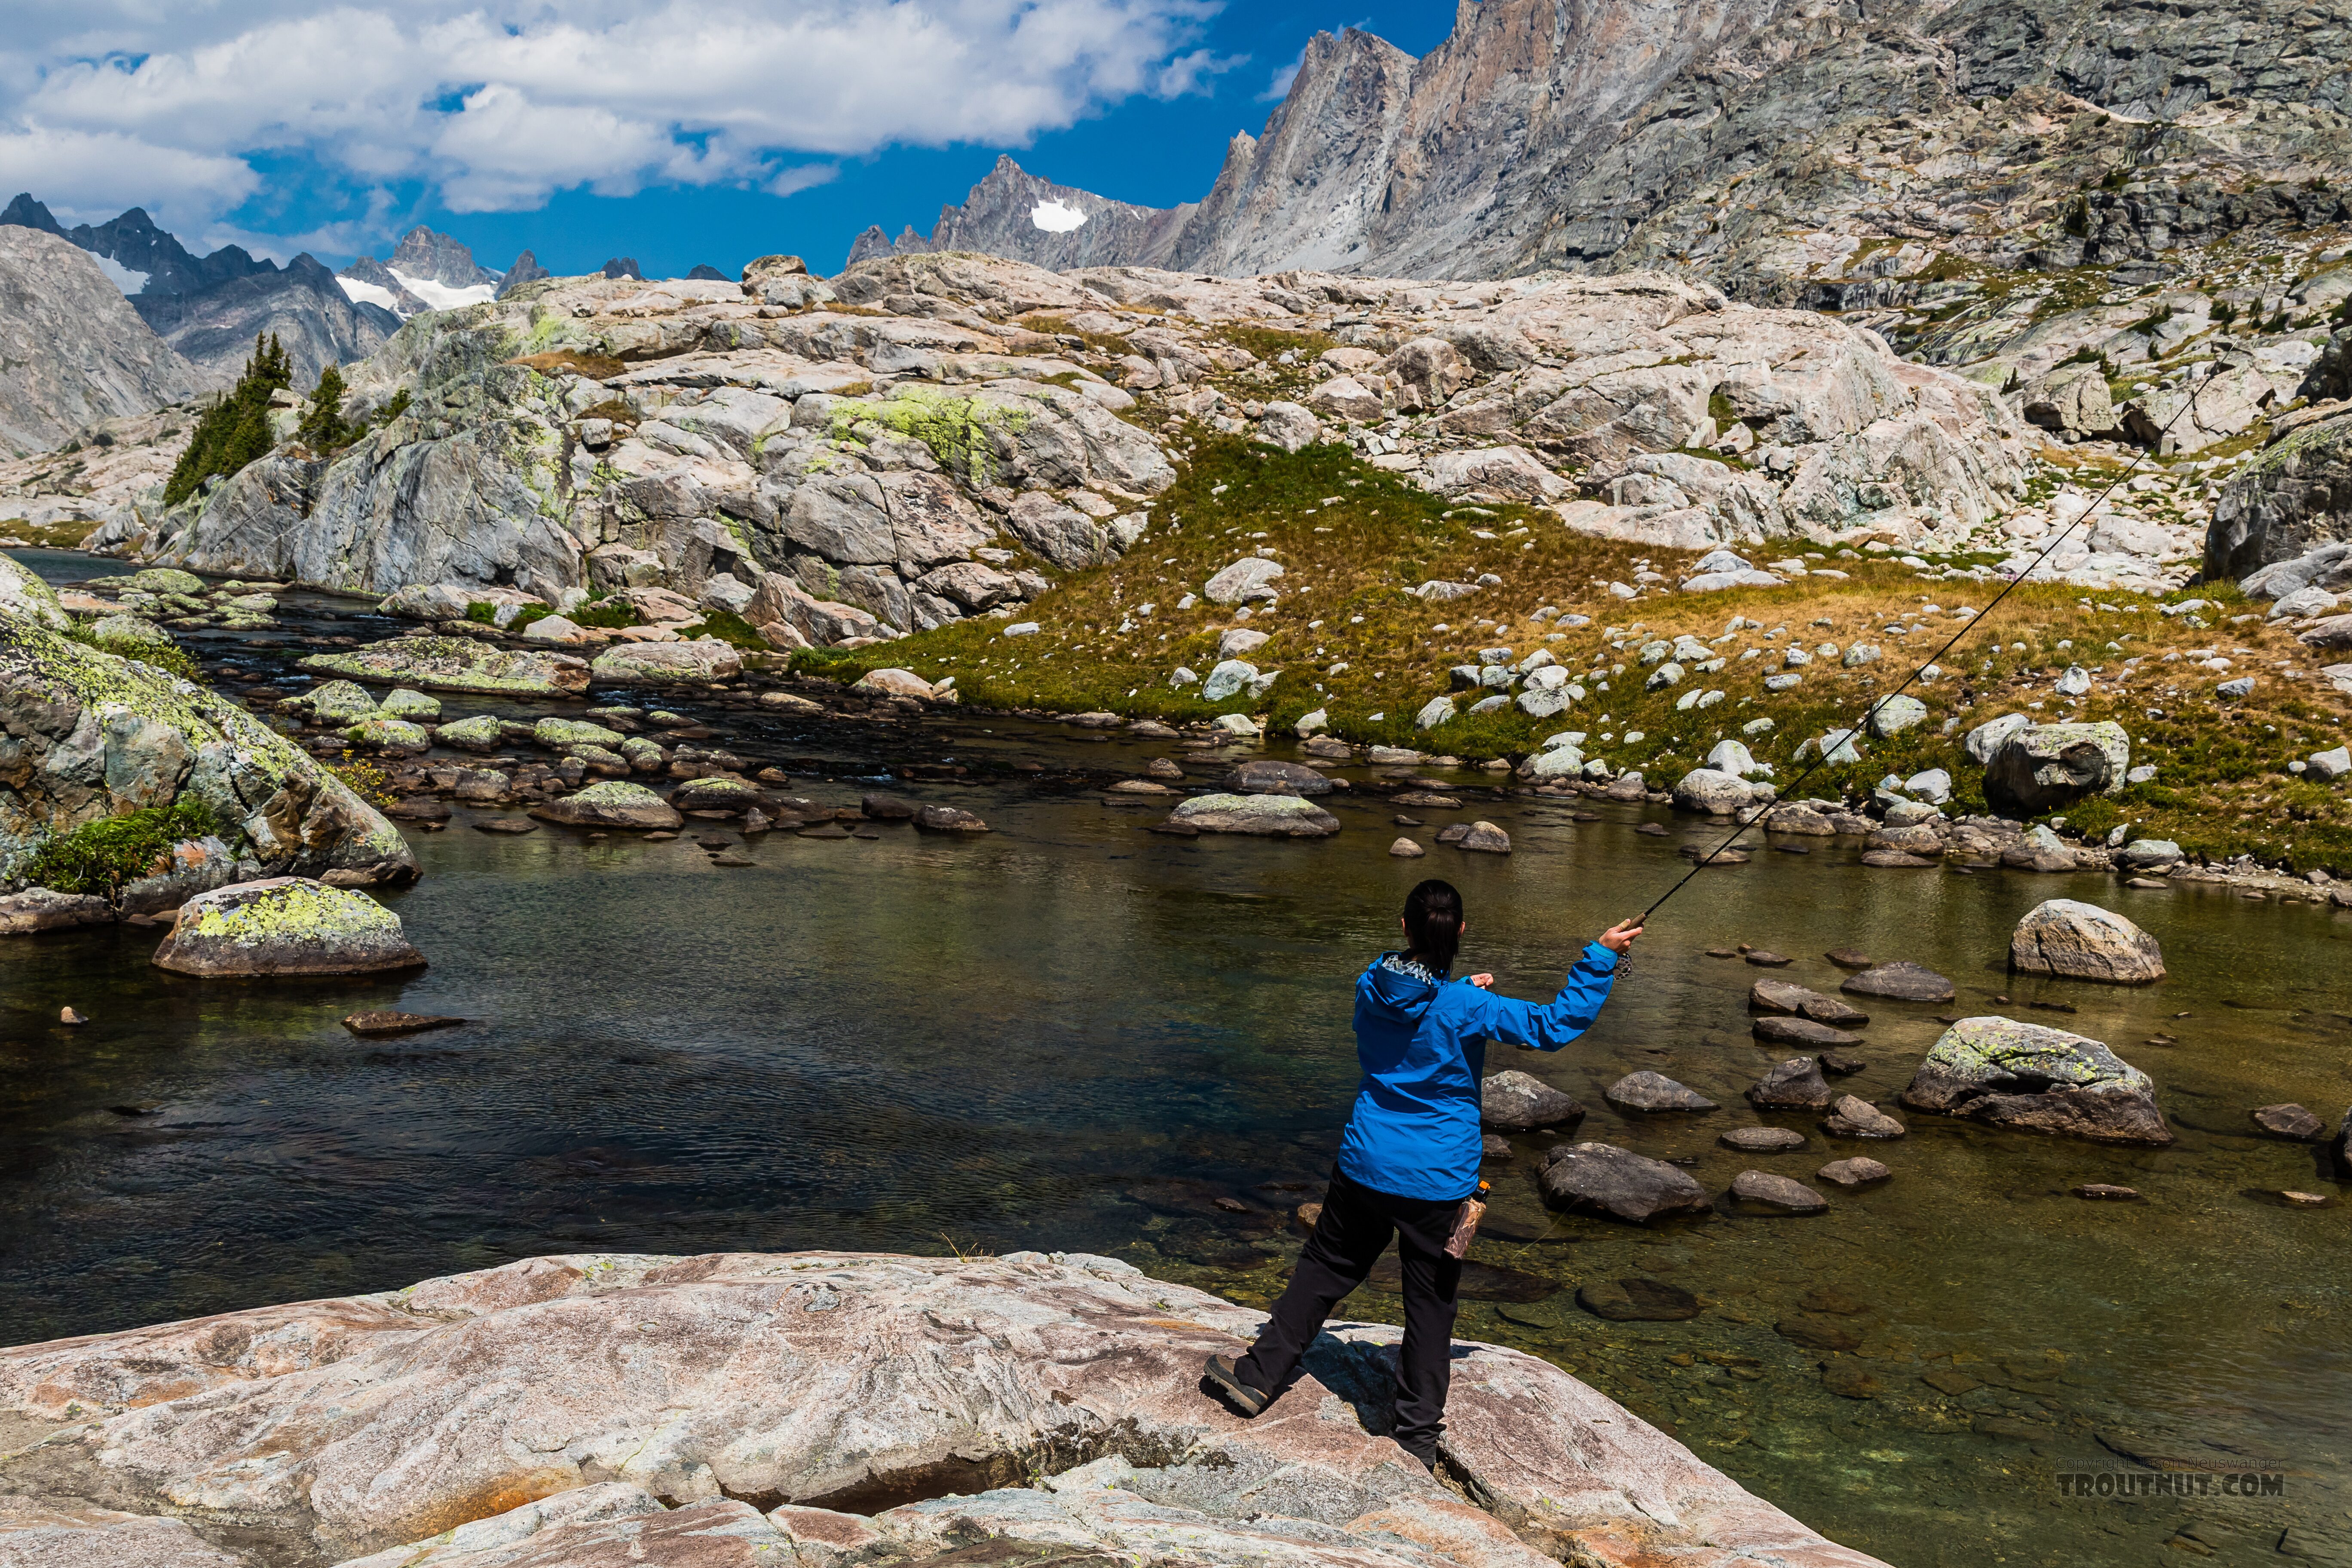 Casting in the Titcomb Basin outlet stream From Titcomb Basin in Wyoming.